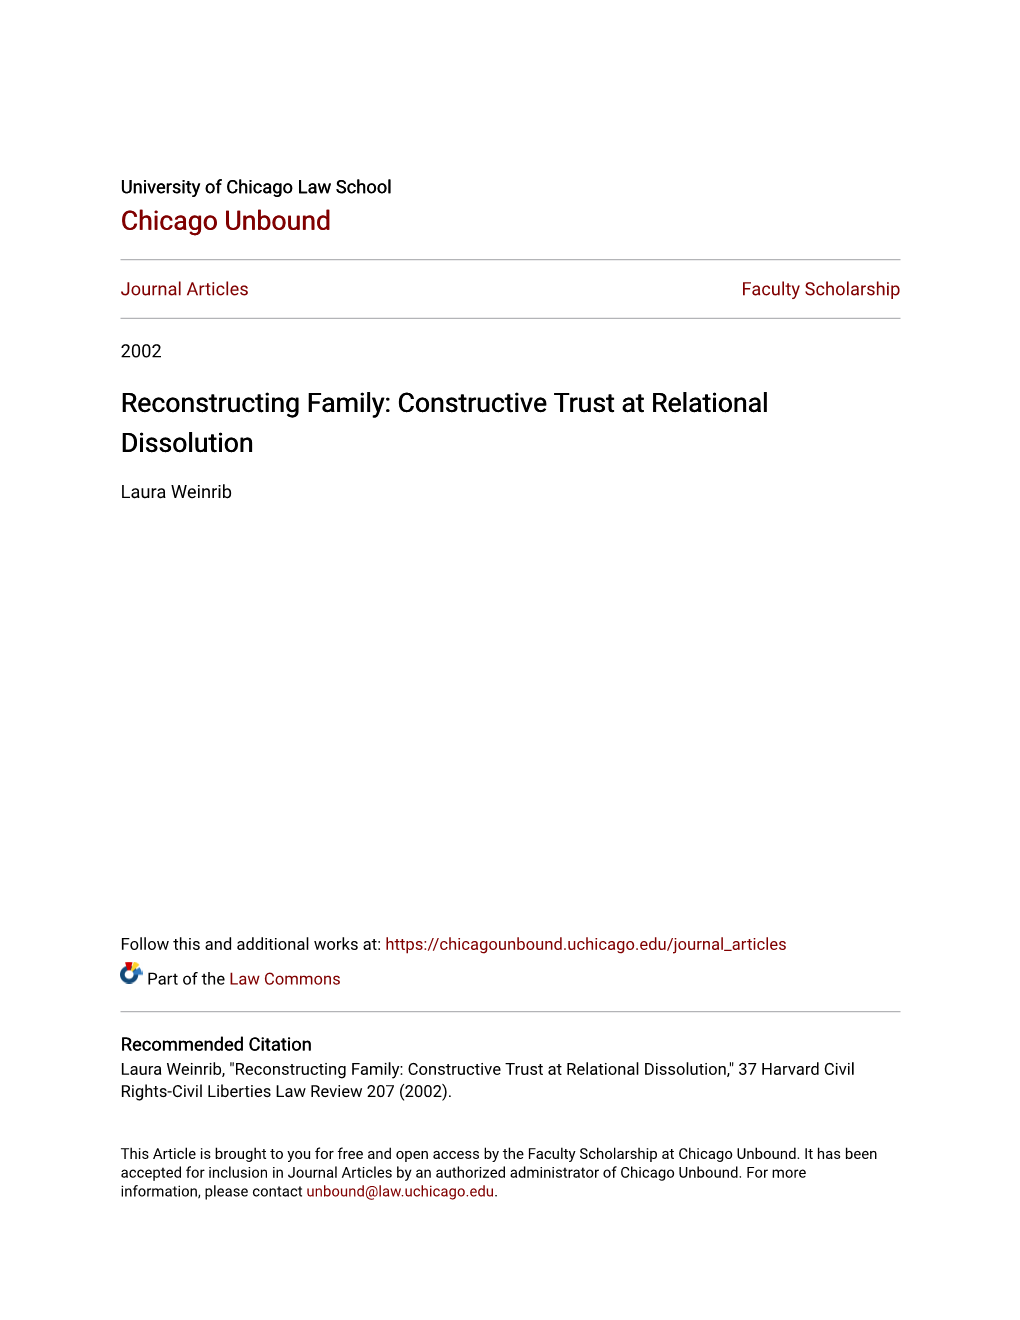 Reconstructing Family: Constructive Trust at Relational Dissolution